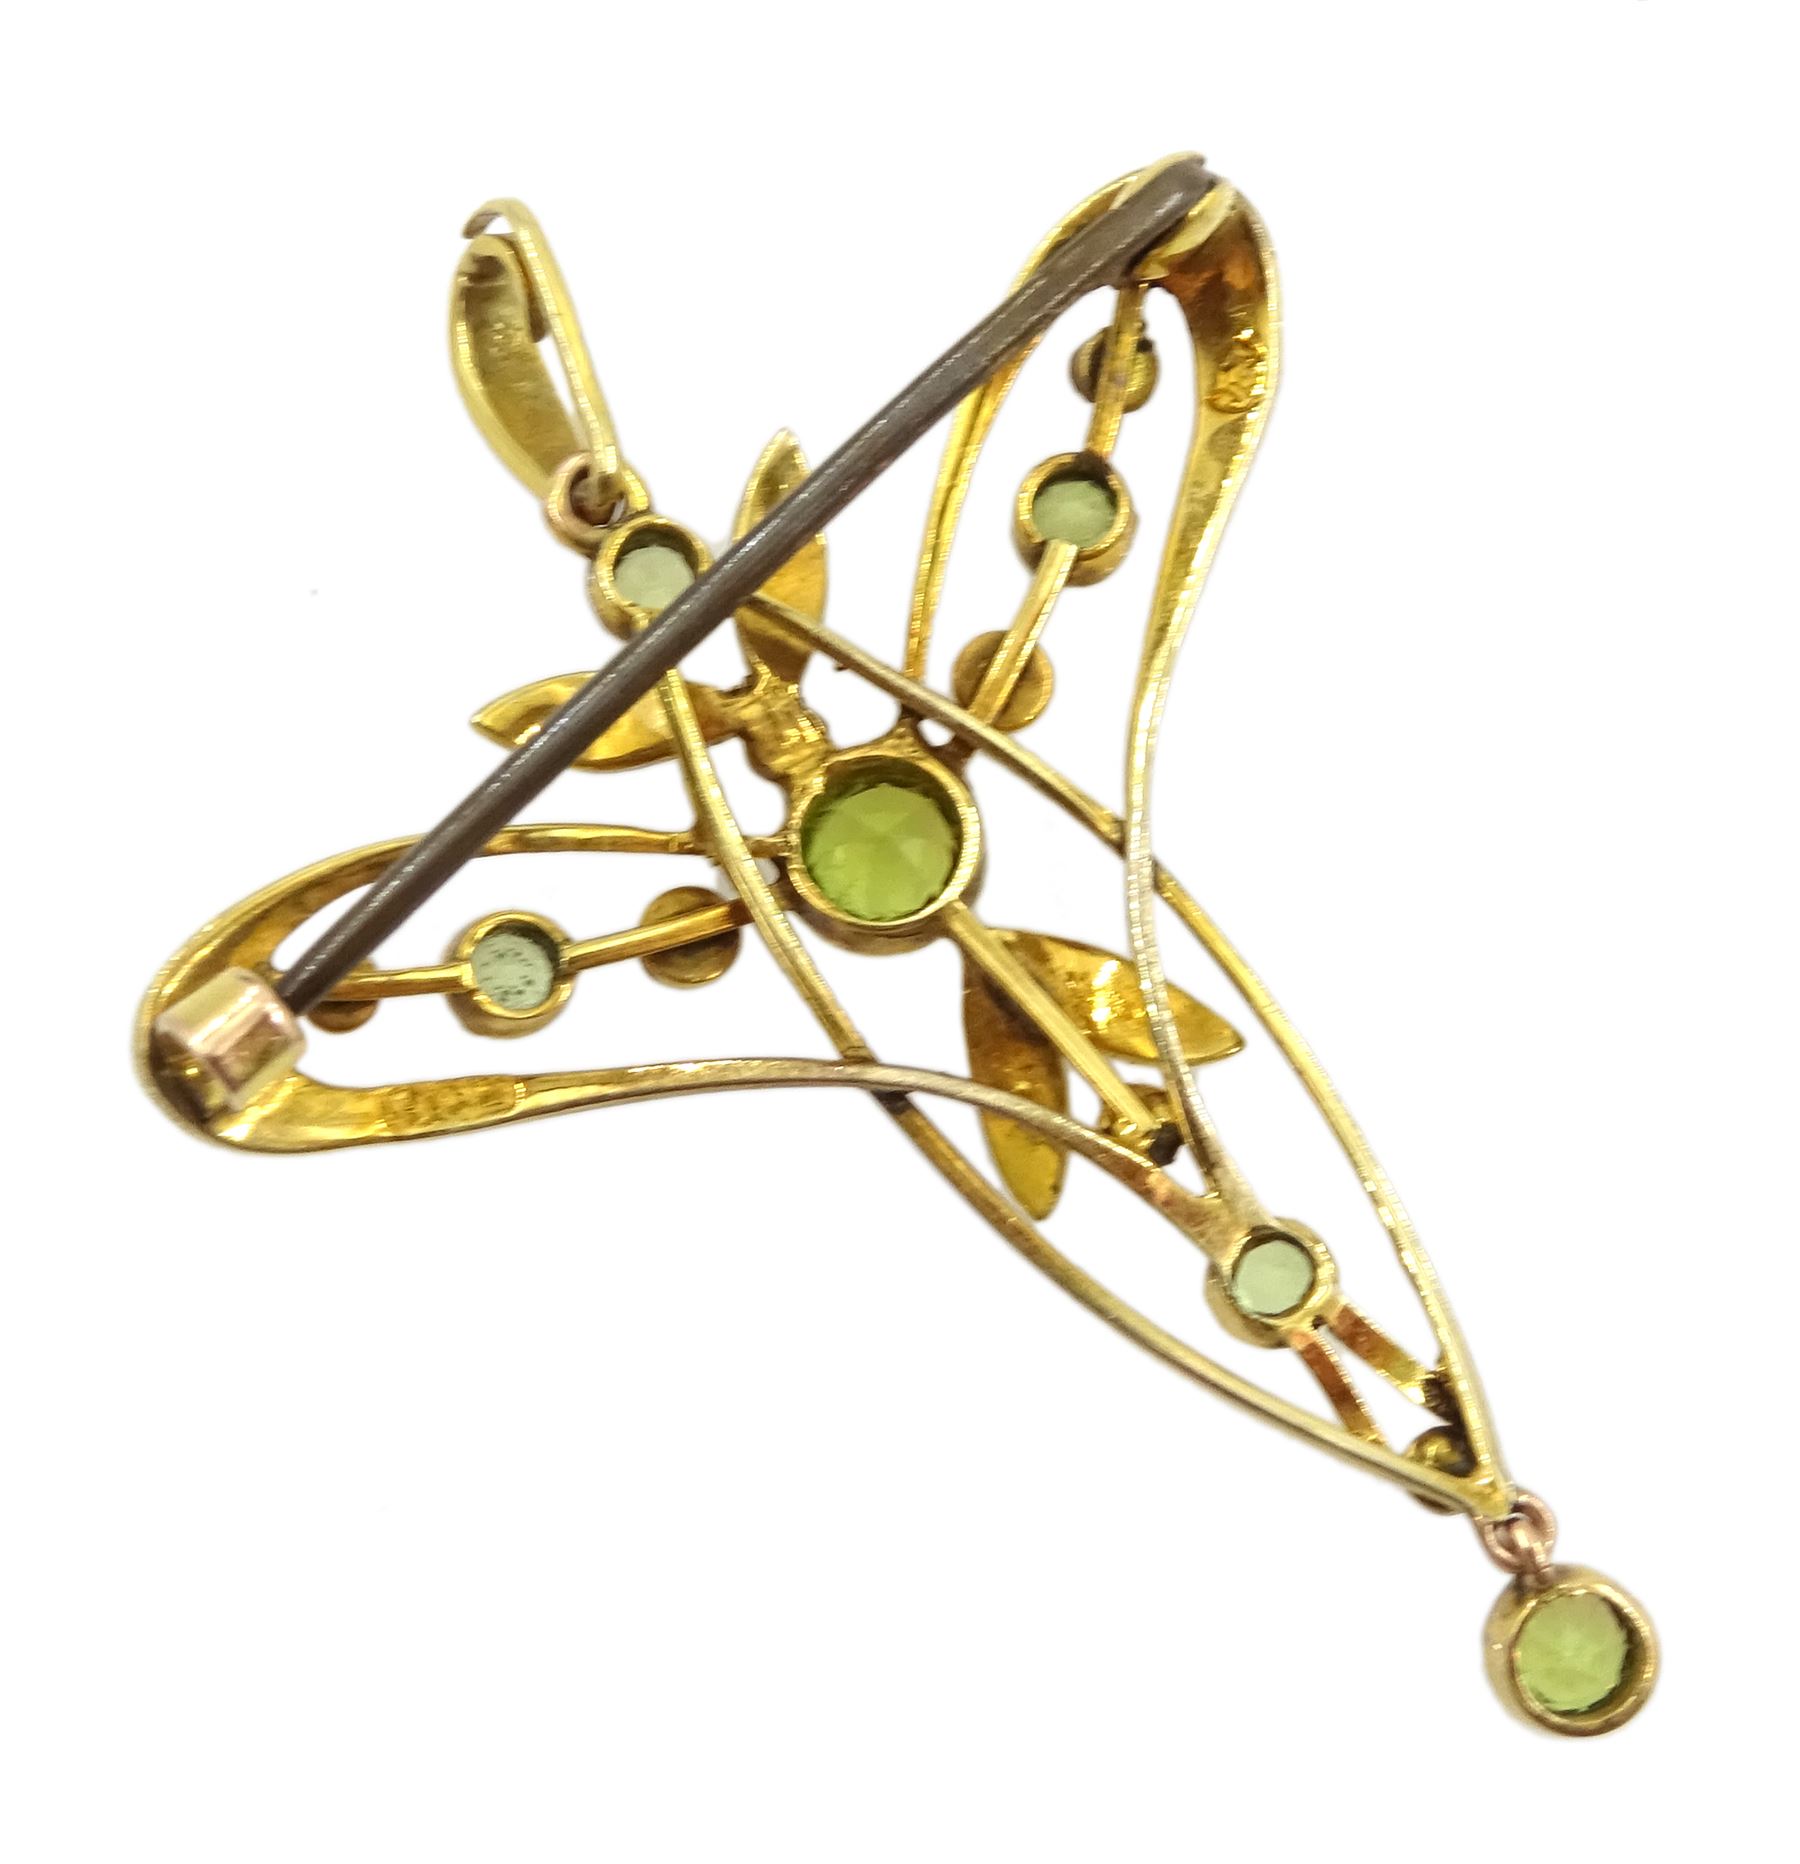 Edwardian Art Nouveau gold peridot and seed pearl pendant/brooch - Image 4 of 4